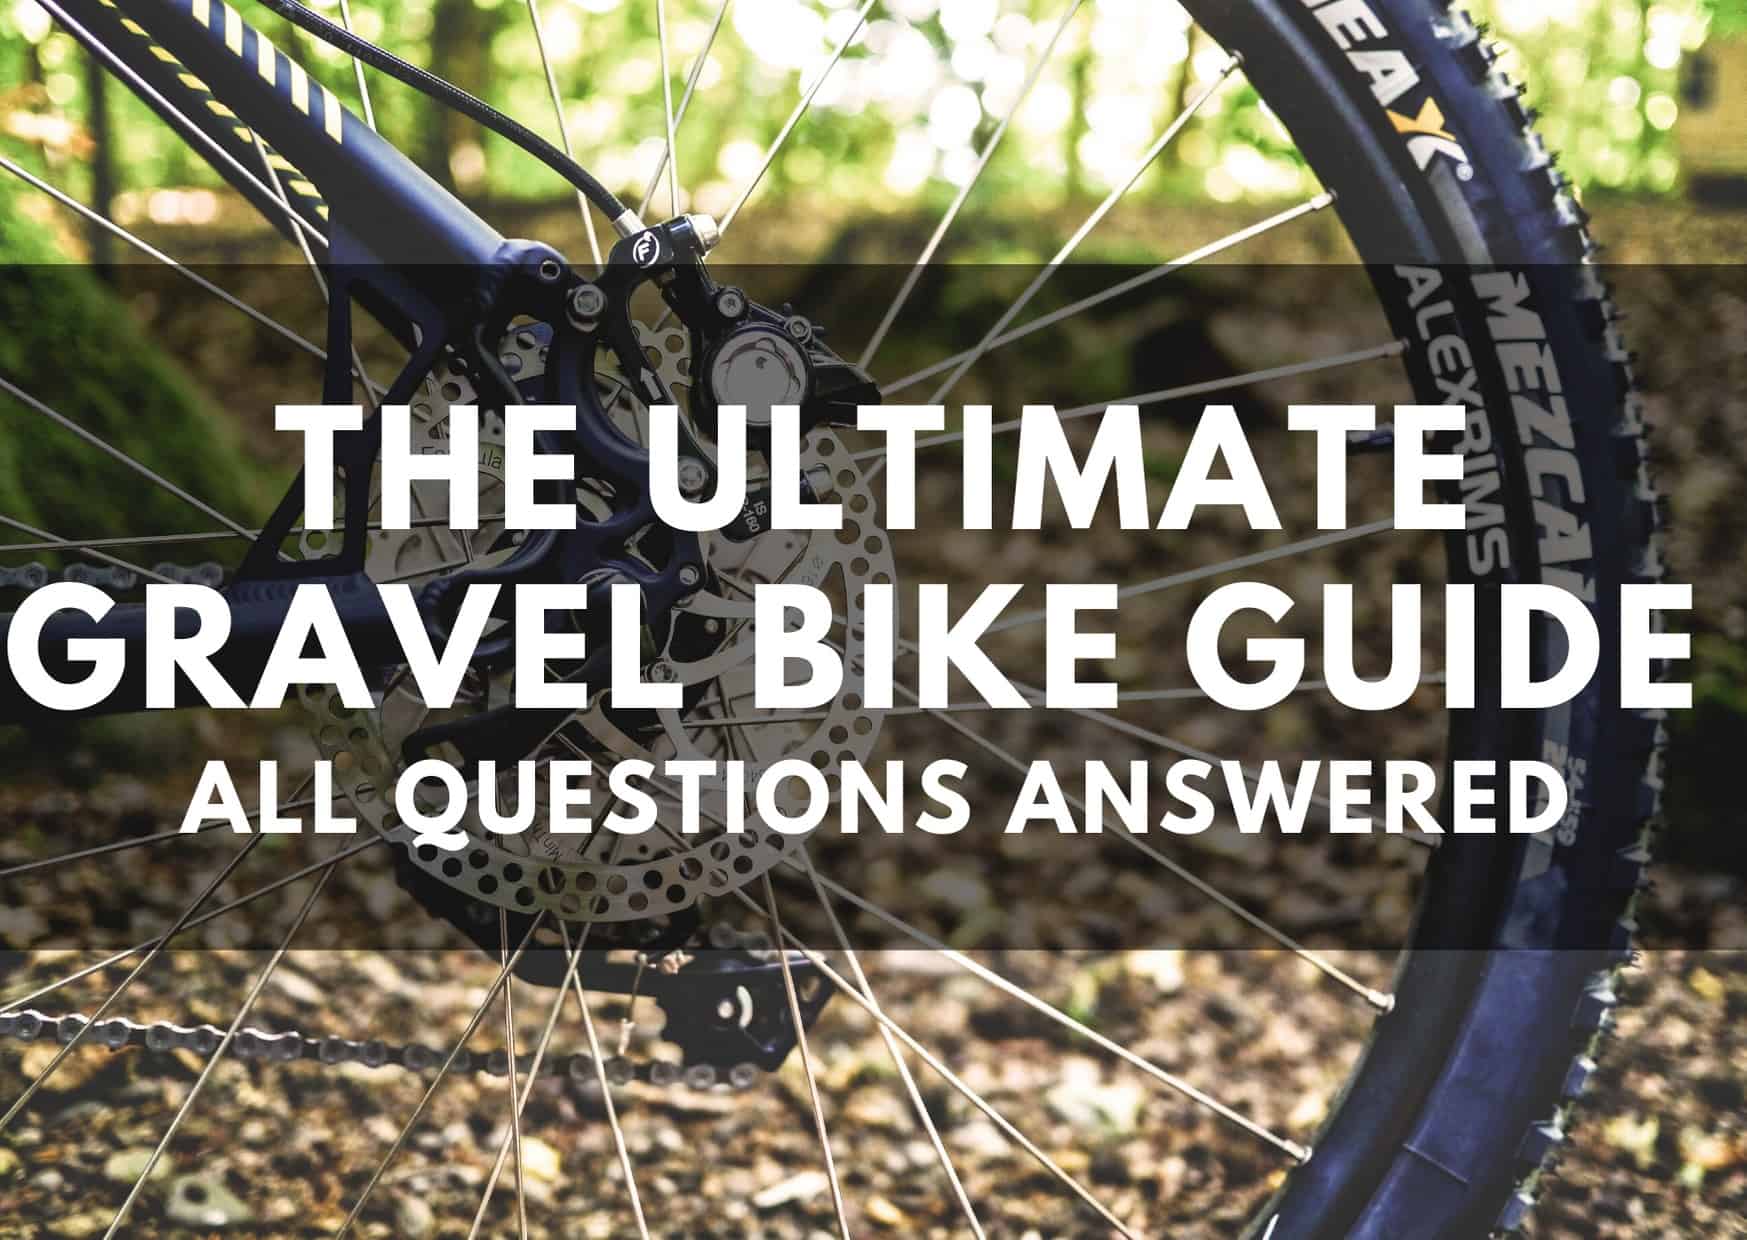 [2020 NEW] The Ultimate Gravel Bike Guide - All questions answered thumbnail